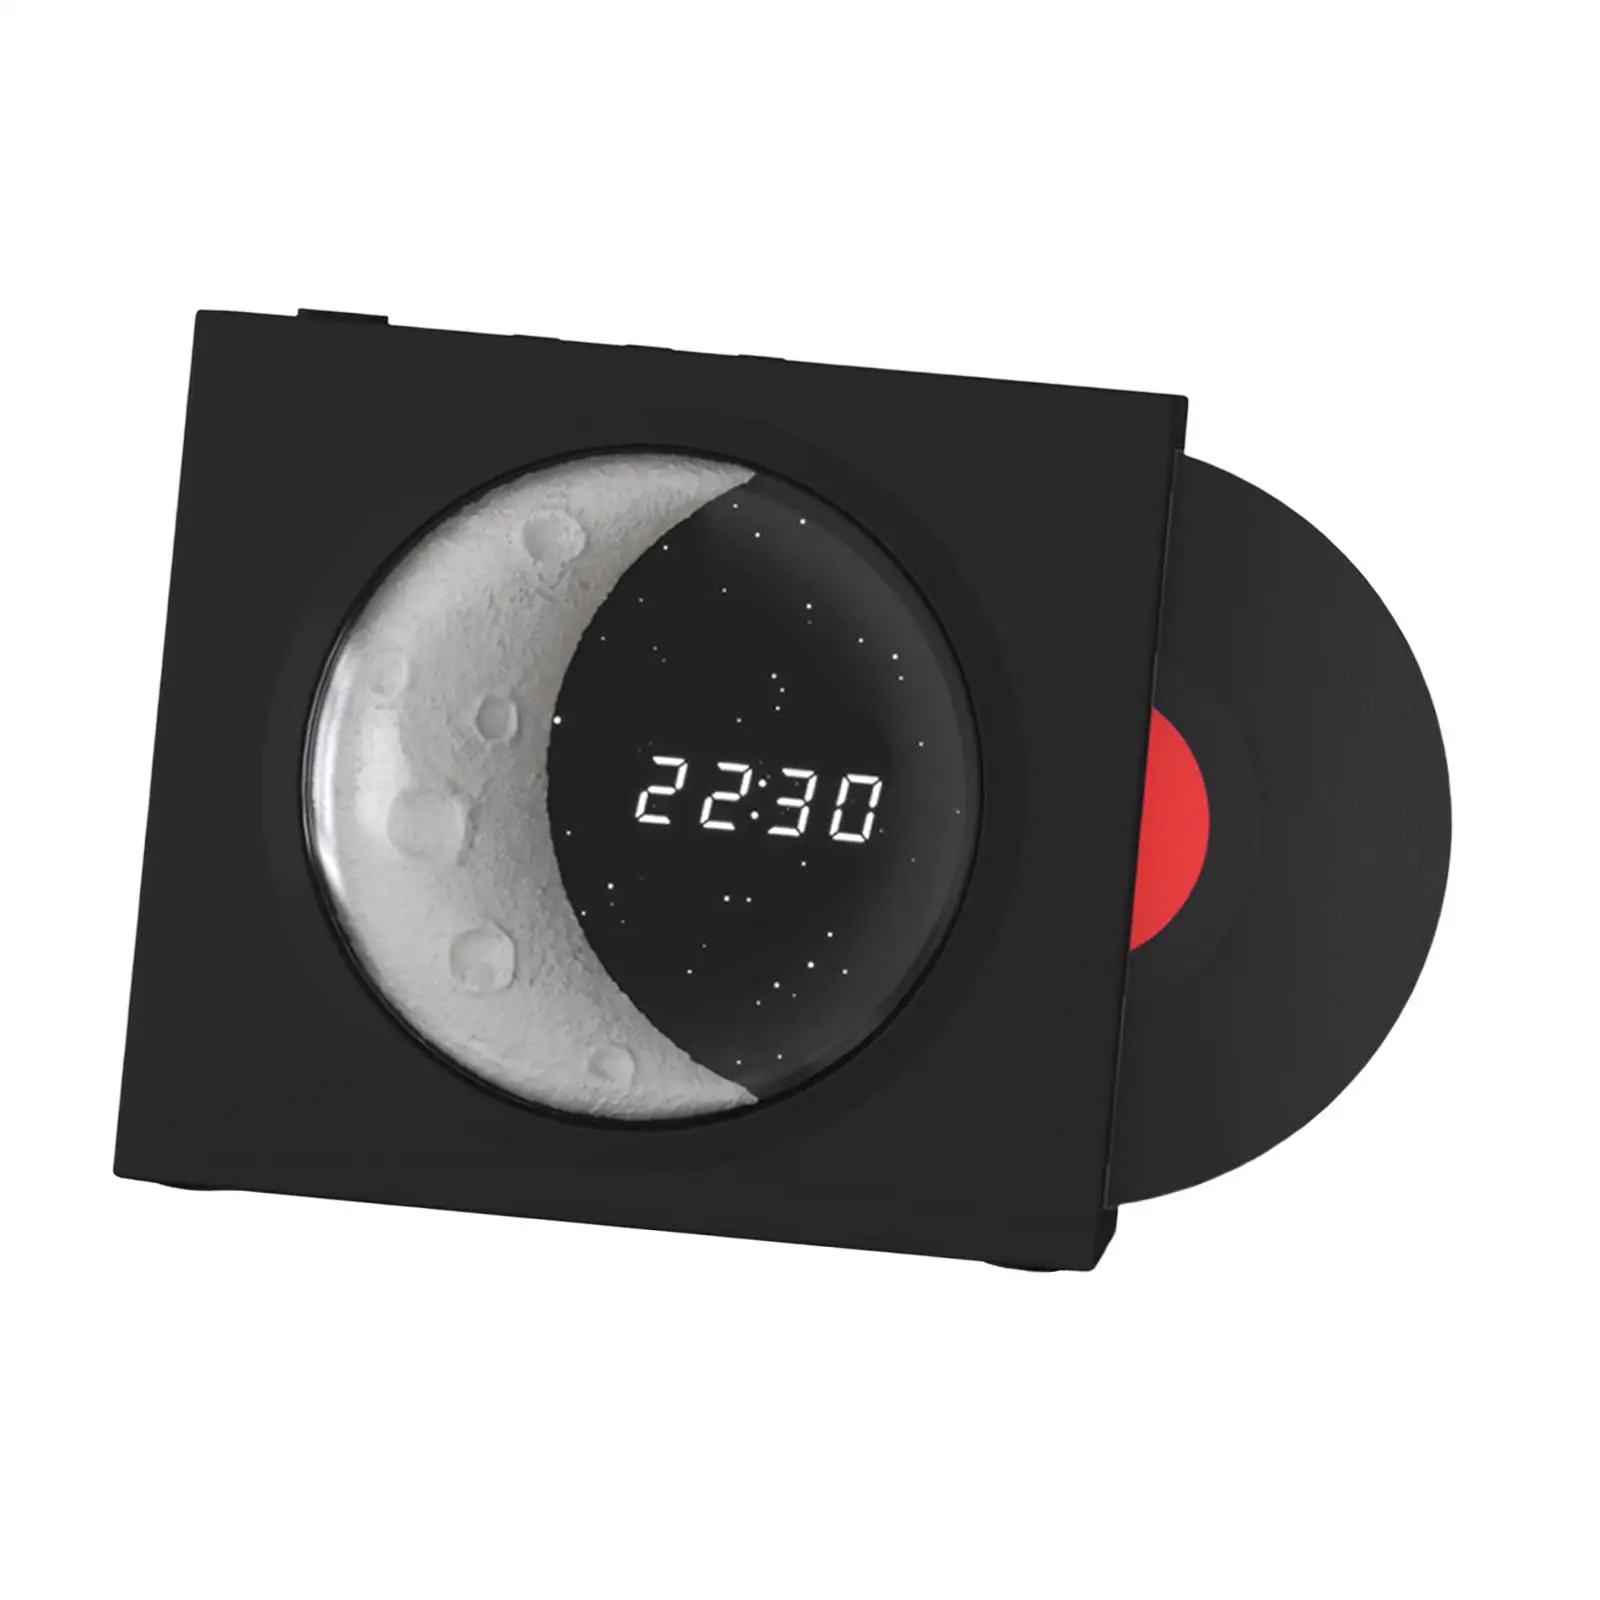 Vinyl Bluetooth Speaker Fashion Stereo Sound Moon Atmosphere Light Vintage Bluetooth Speaker with Clock Display for Bedroom,Home